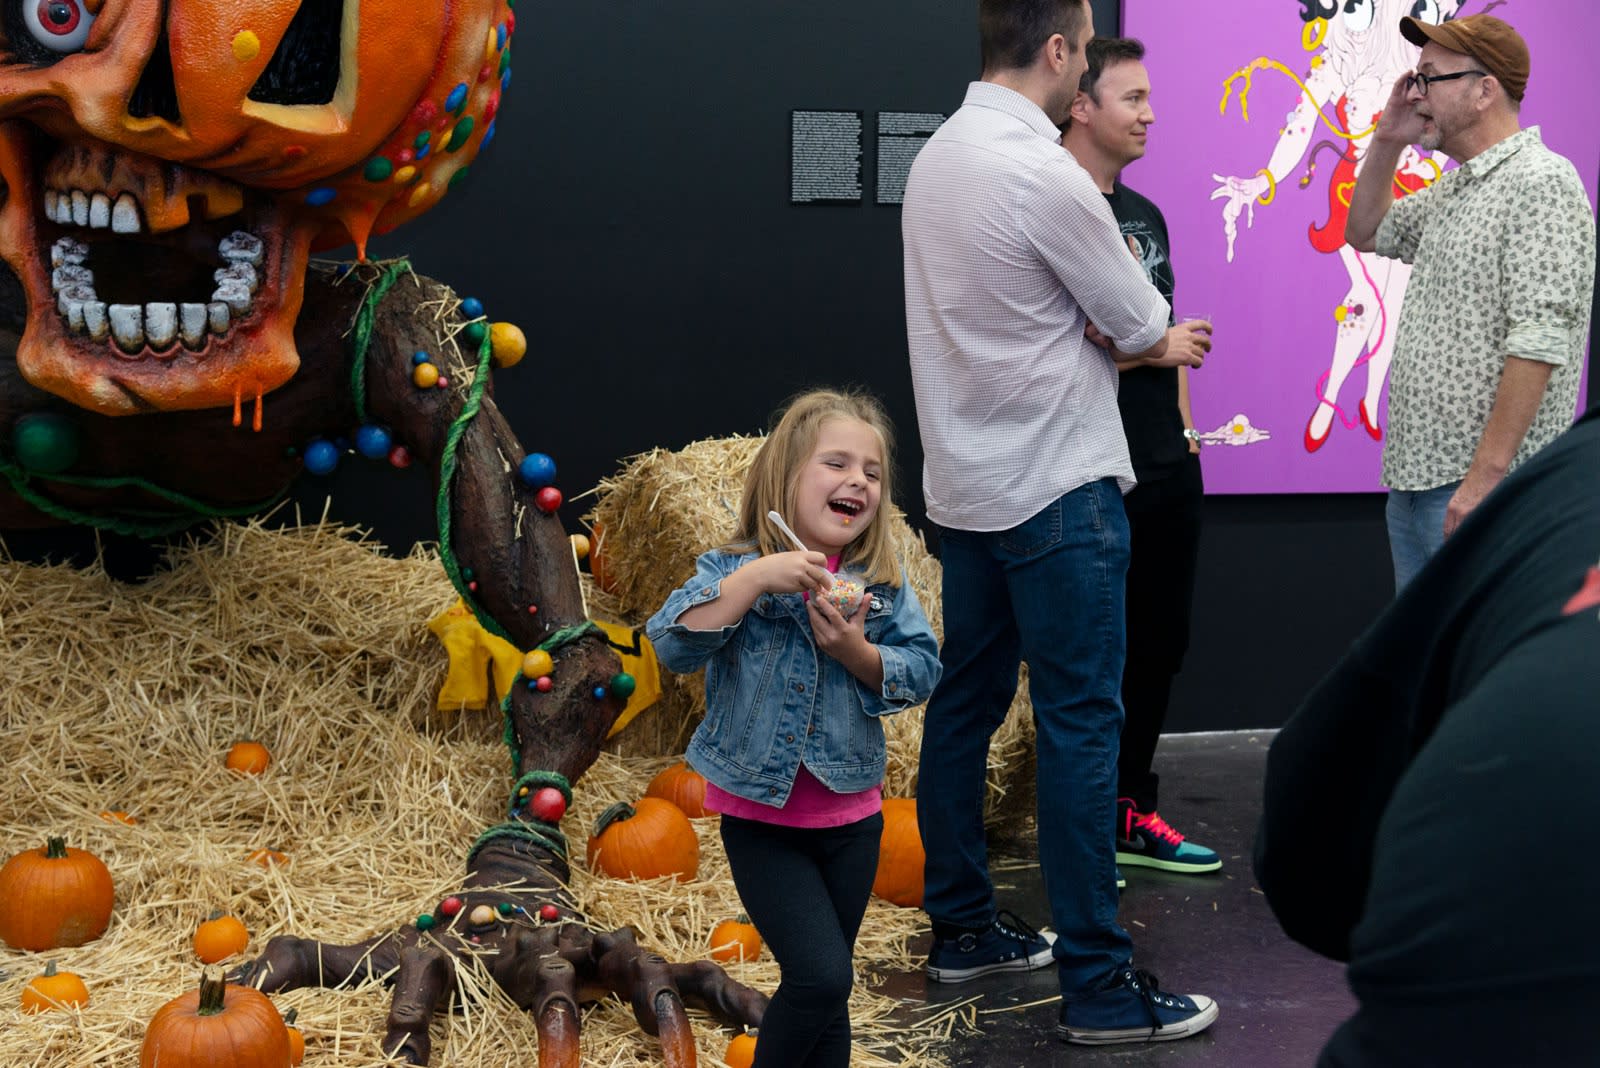 A young Alex Pardee fan enjoying Dippin' Dots in the gallery